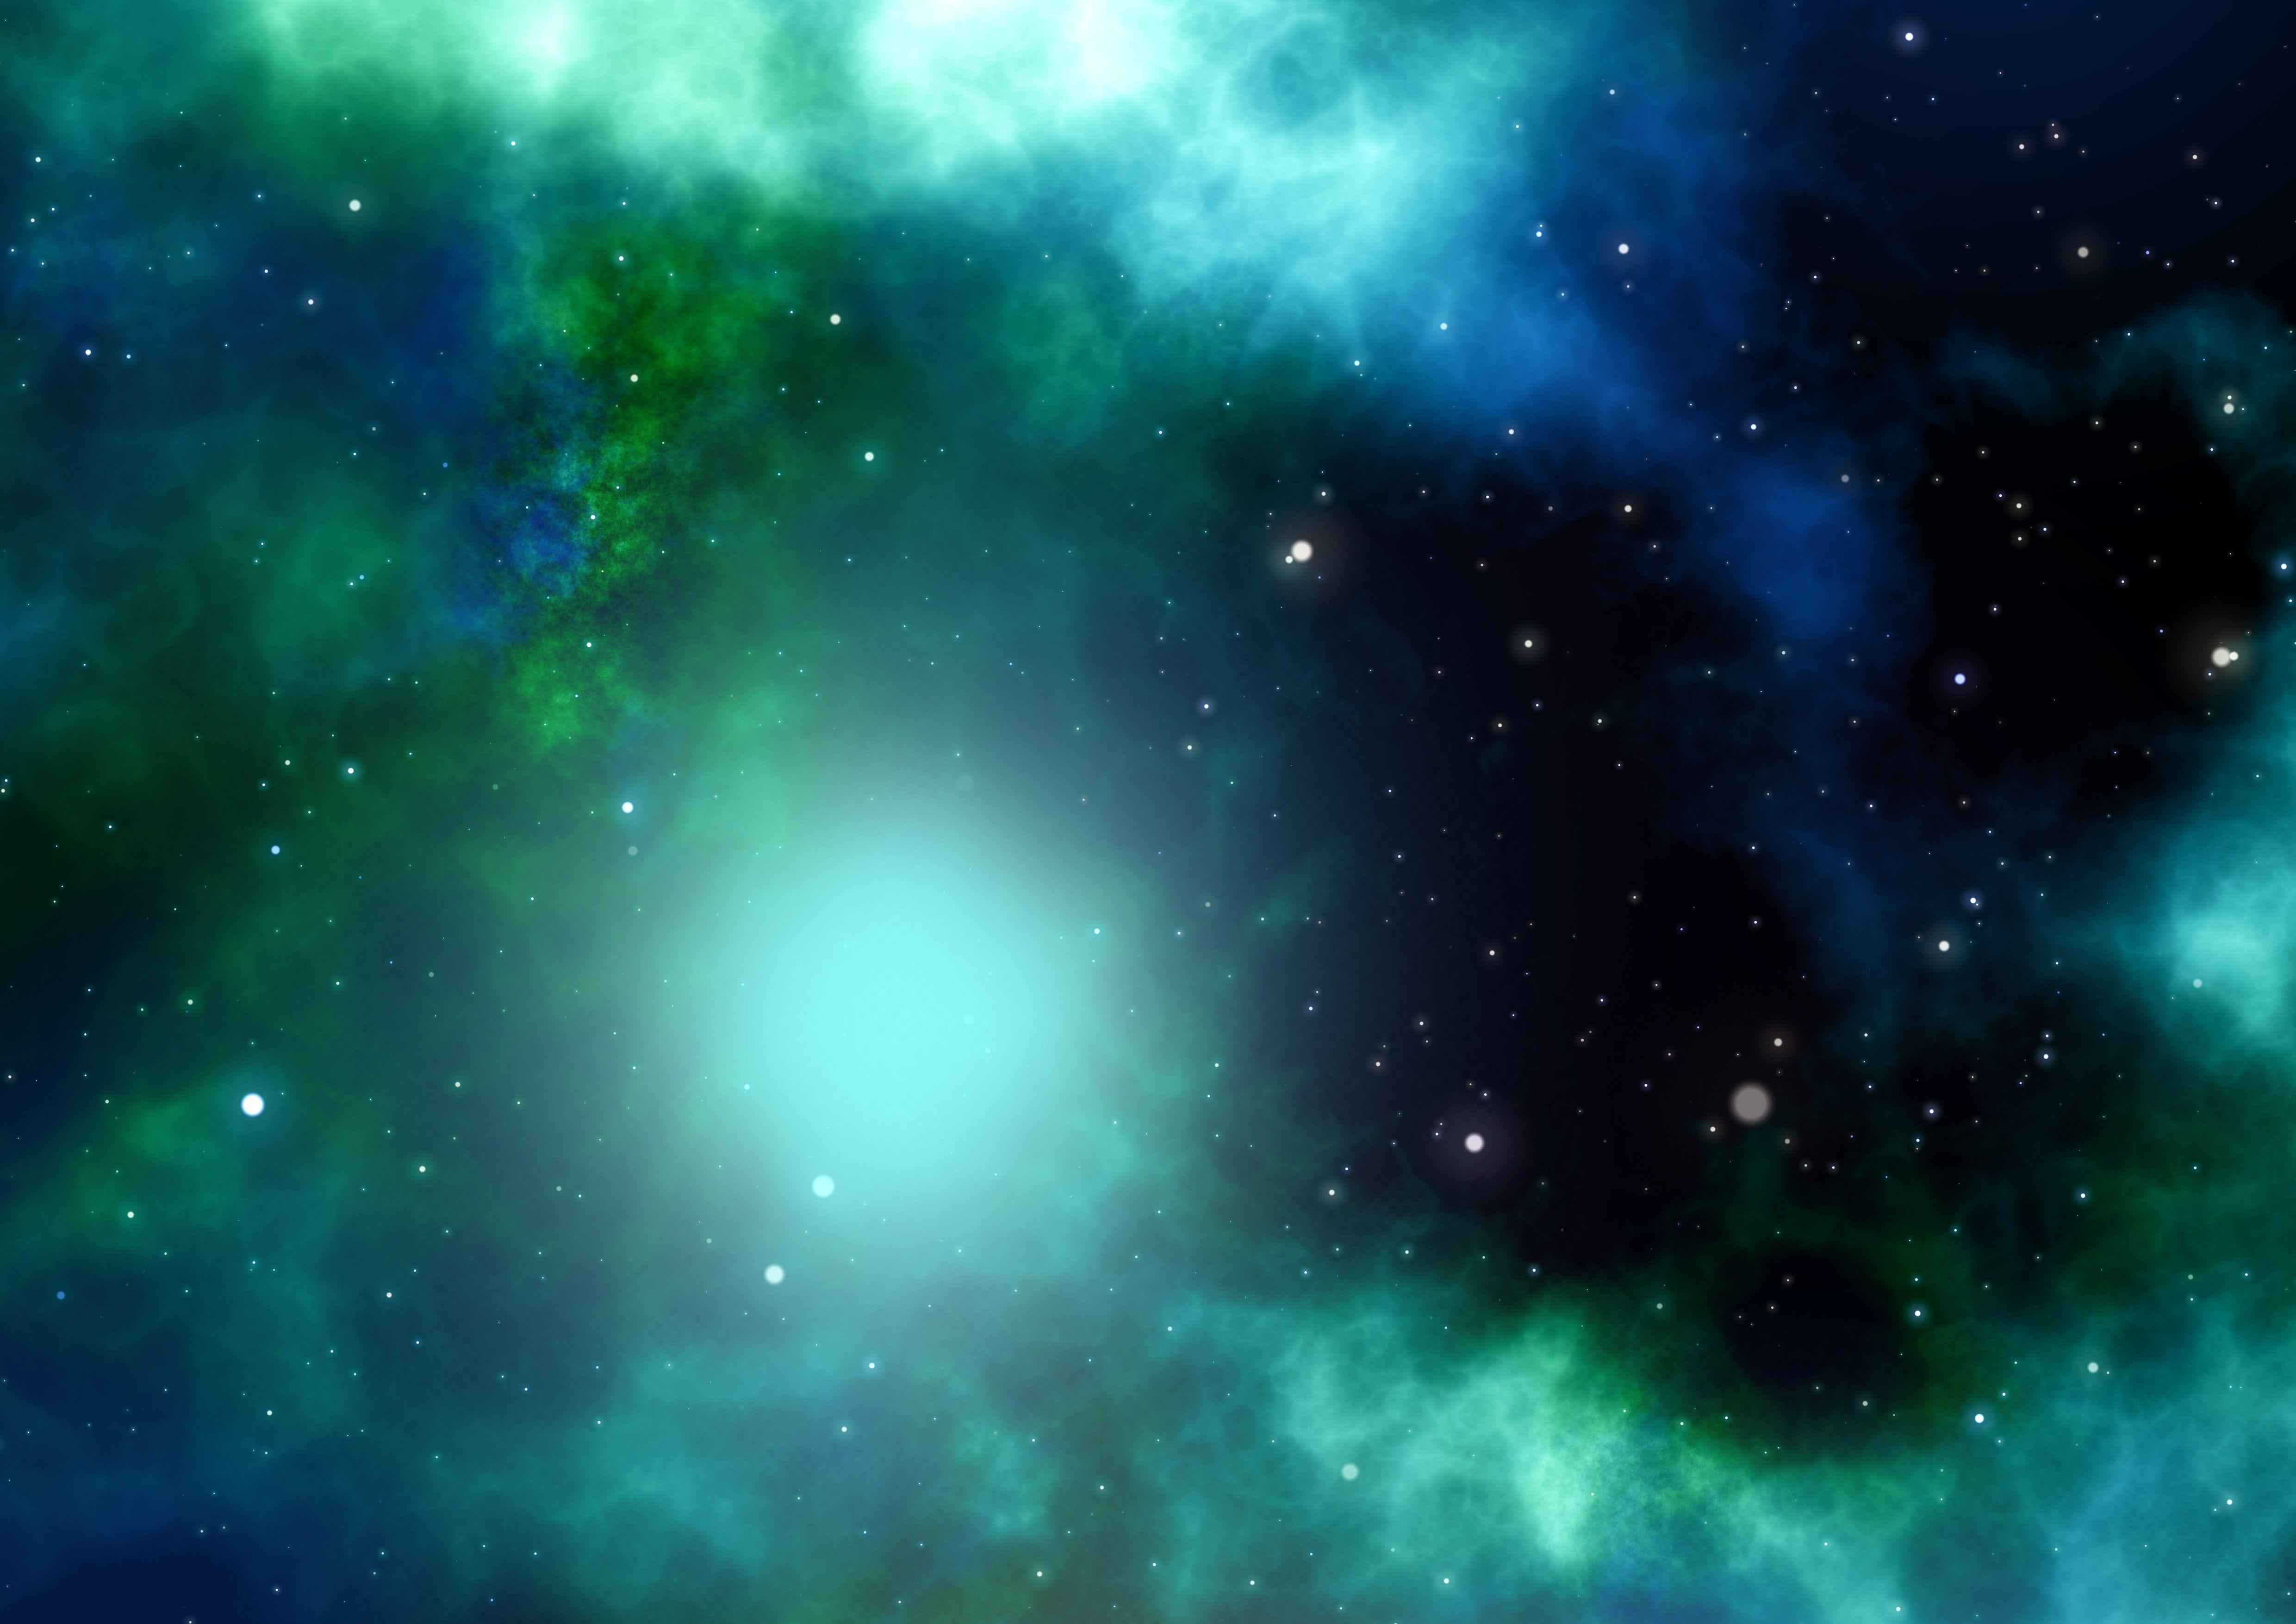 Download wallpaper 1920x1080 space galaxy planets green universe full  hd hdtv fhd 1080p hd background